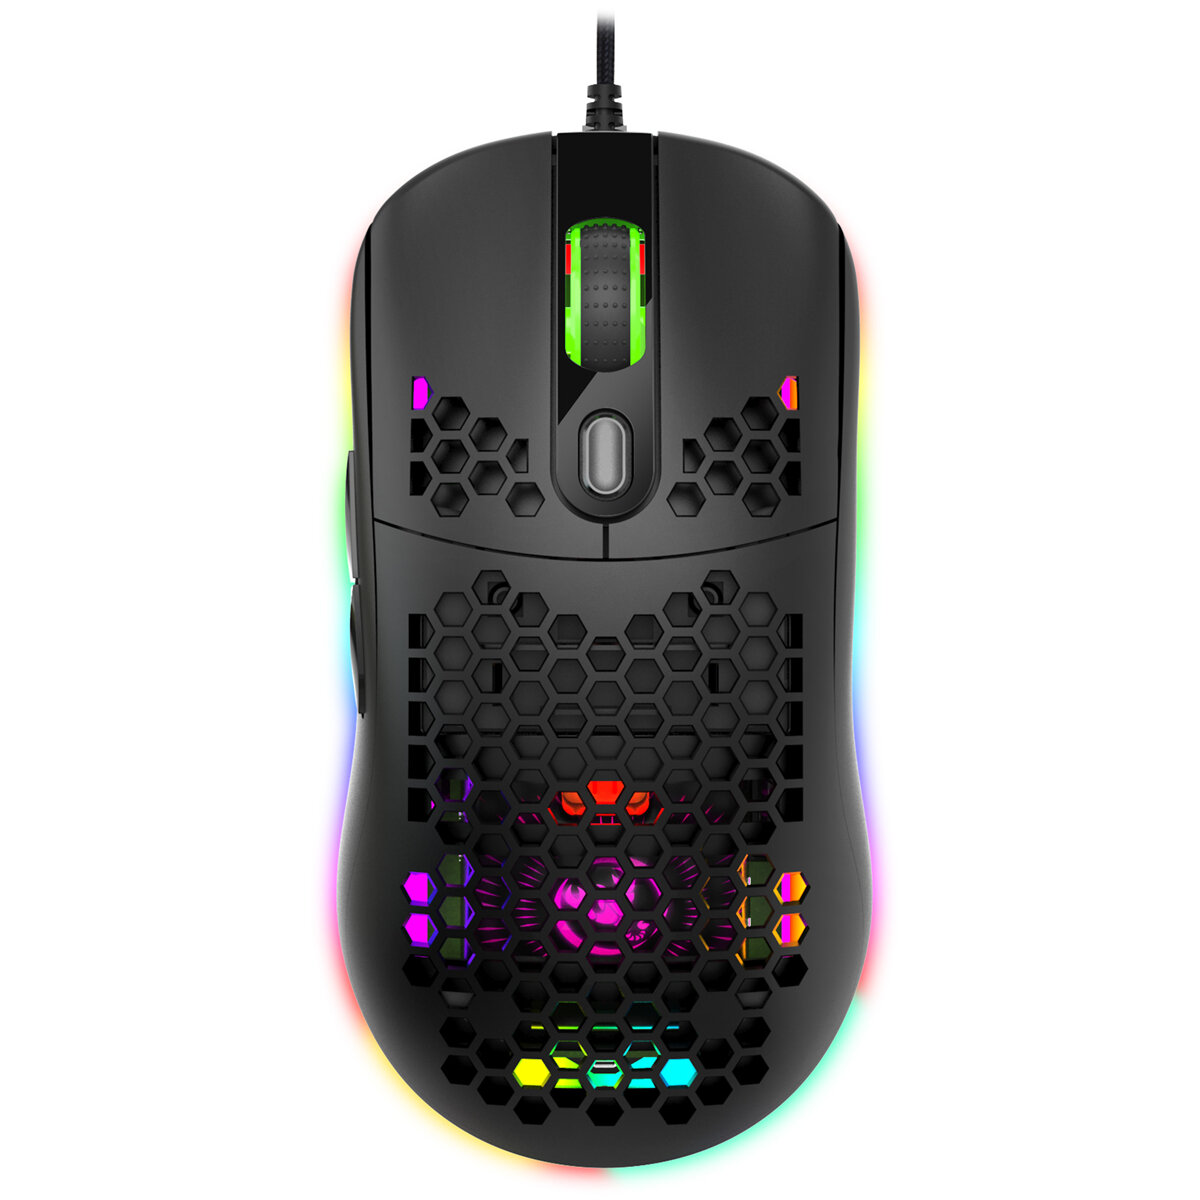 

HXSJ X600 Wired Gaming Mouse RGB Backlight Hollow Honeycomb Shape 6400DPI Macro Programming Home Office Gamer Mice for D